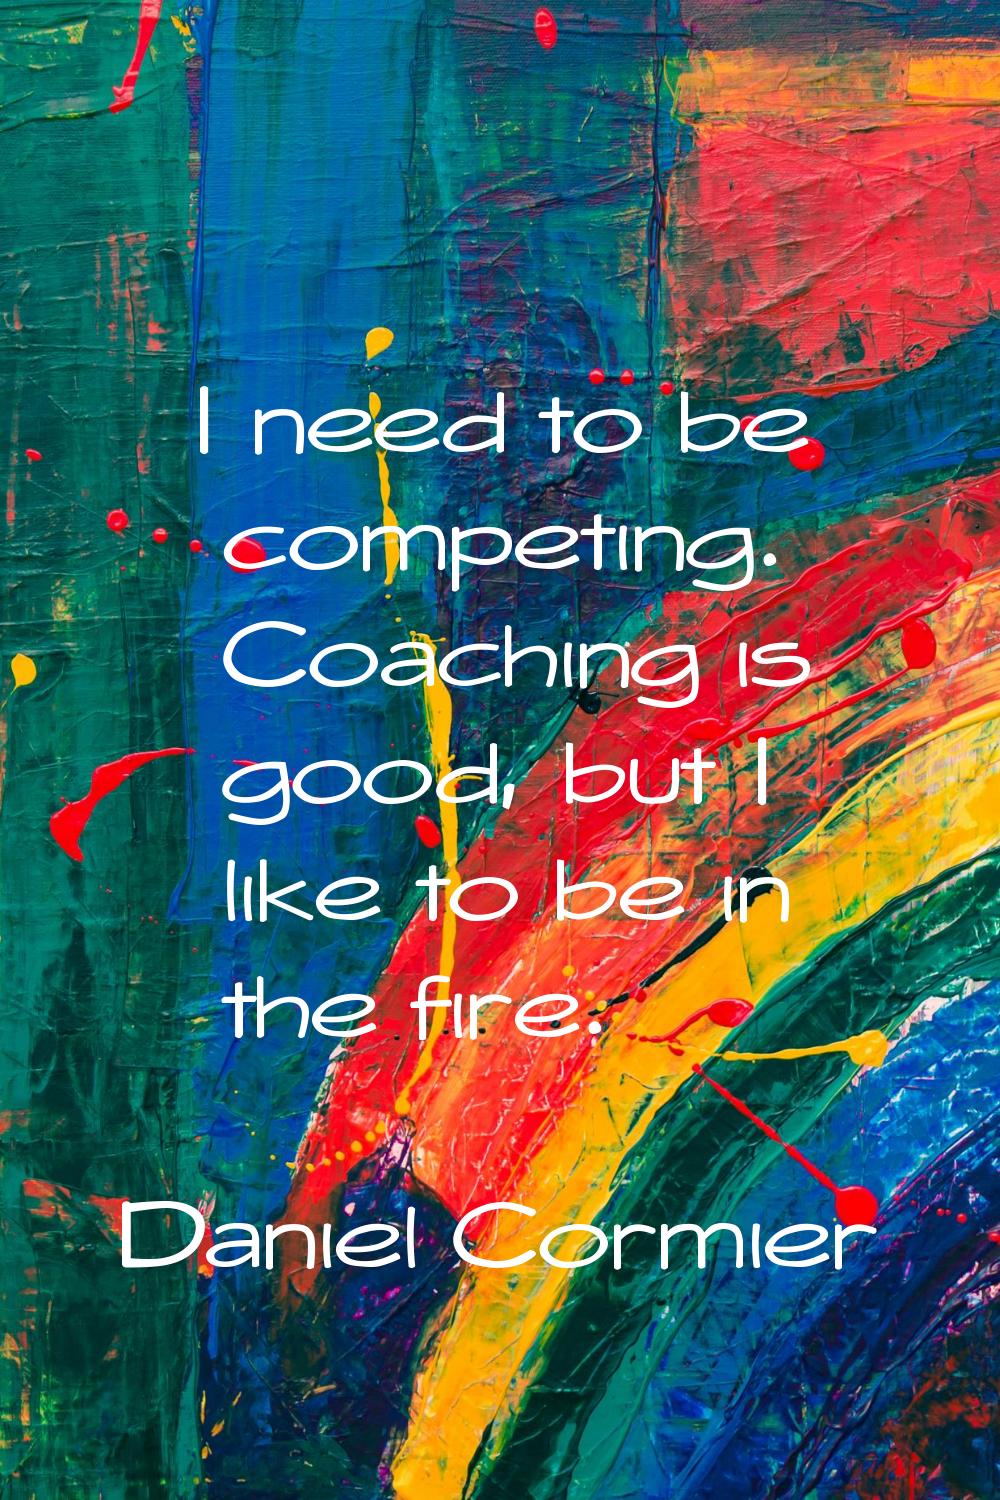 I need to be competing. Coaching is good, but I like to be in the fire.